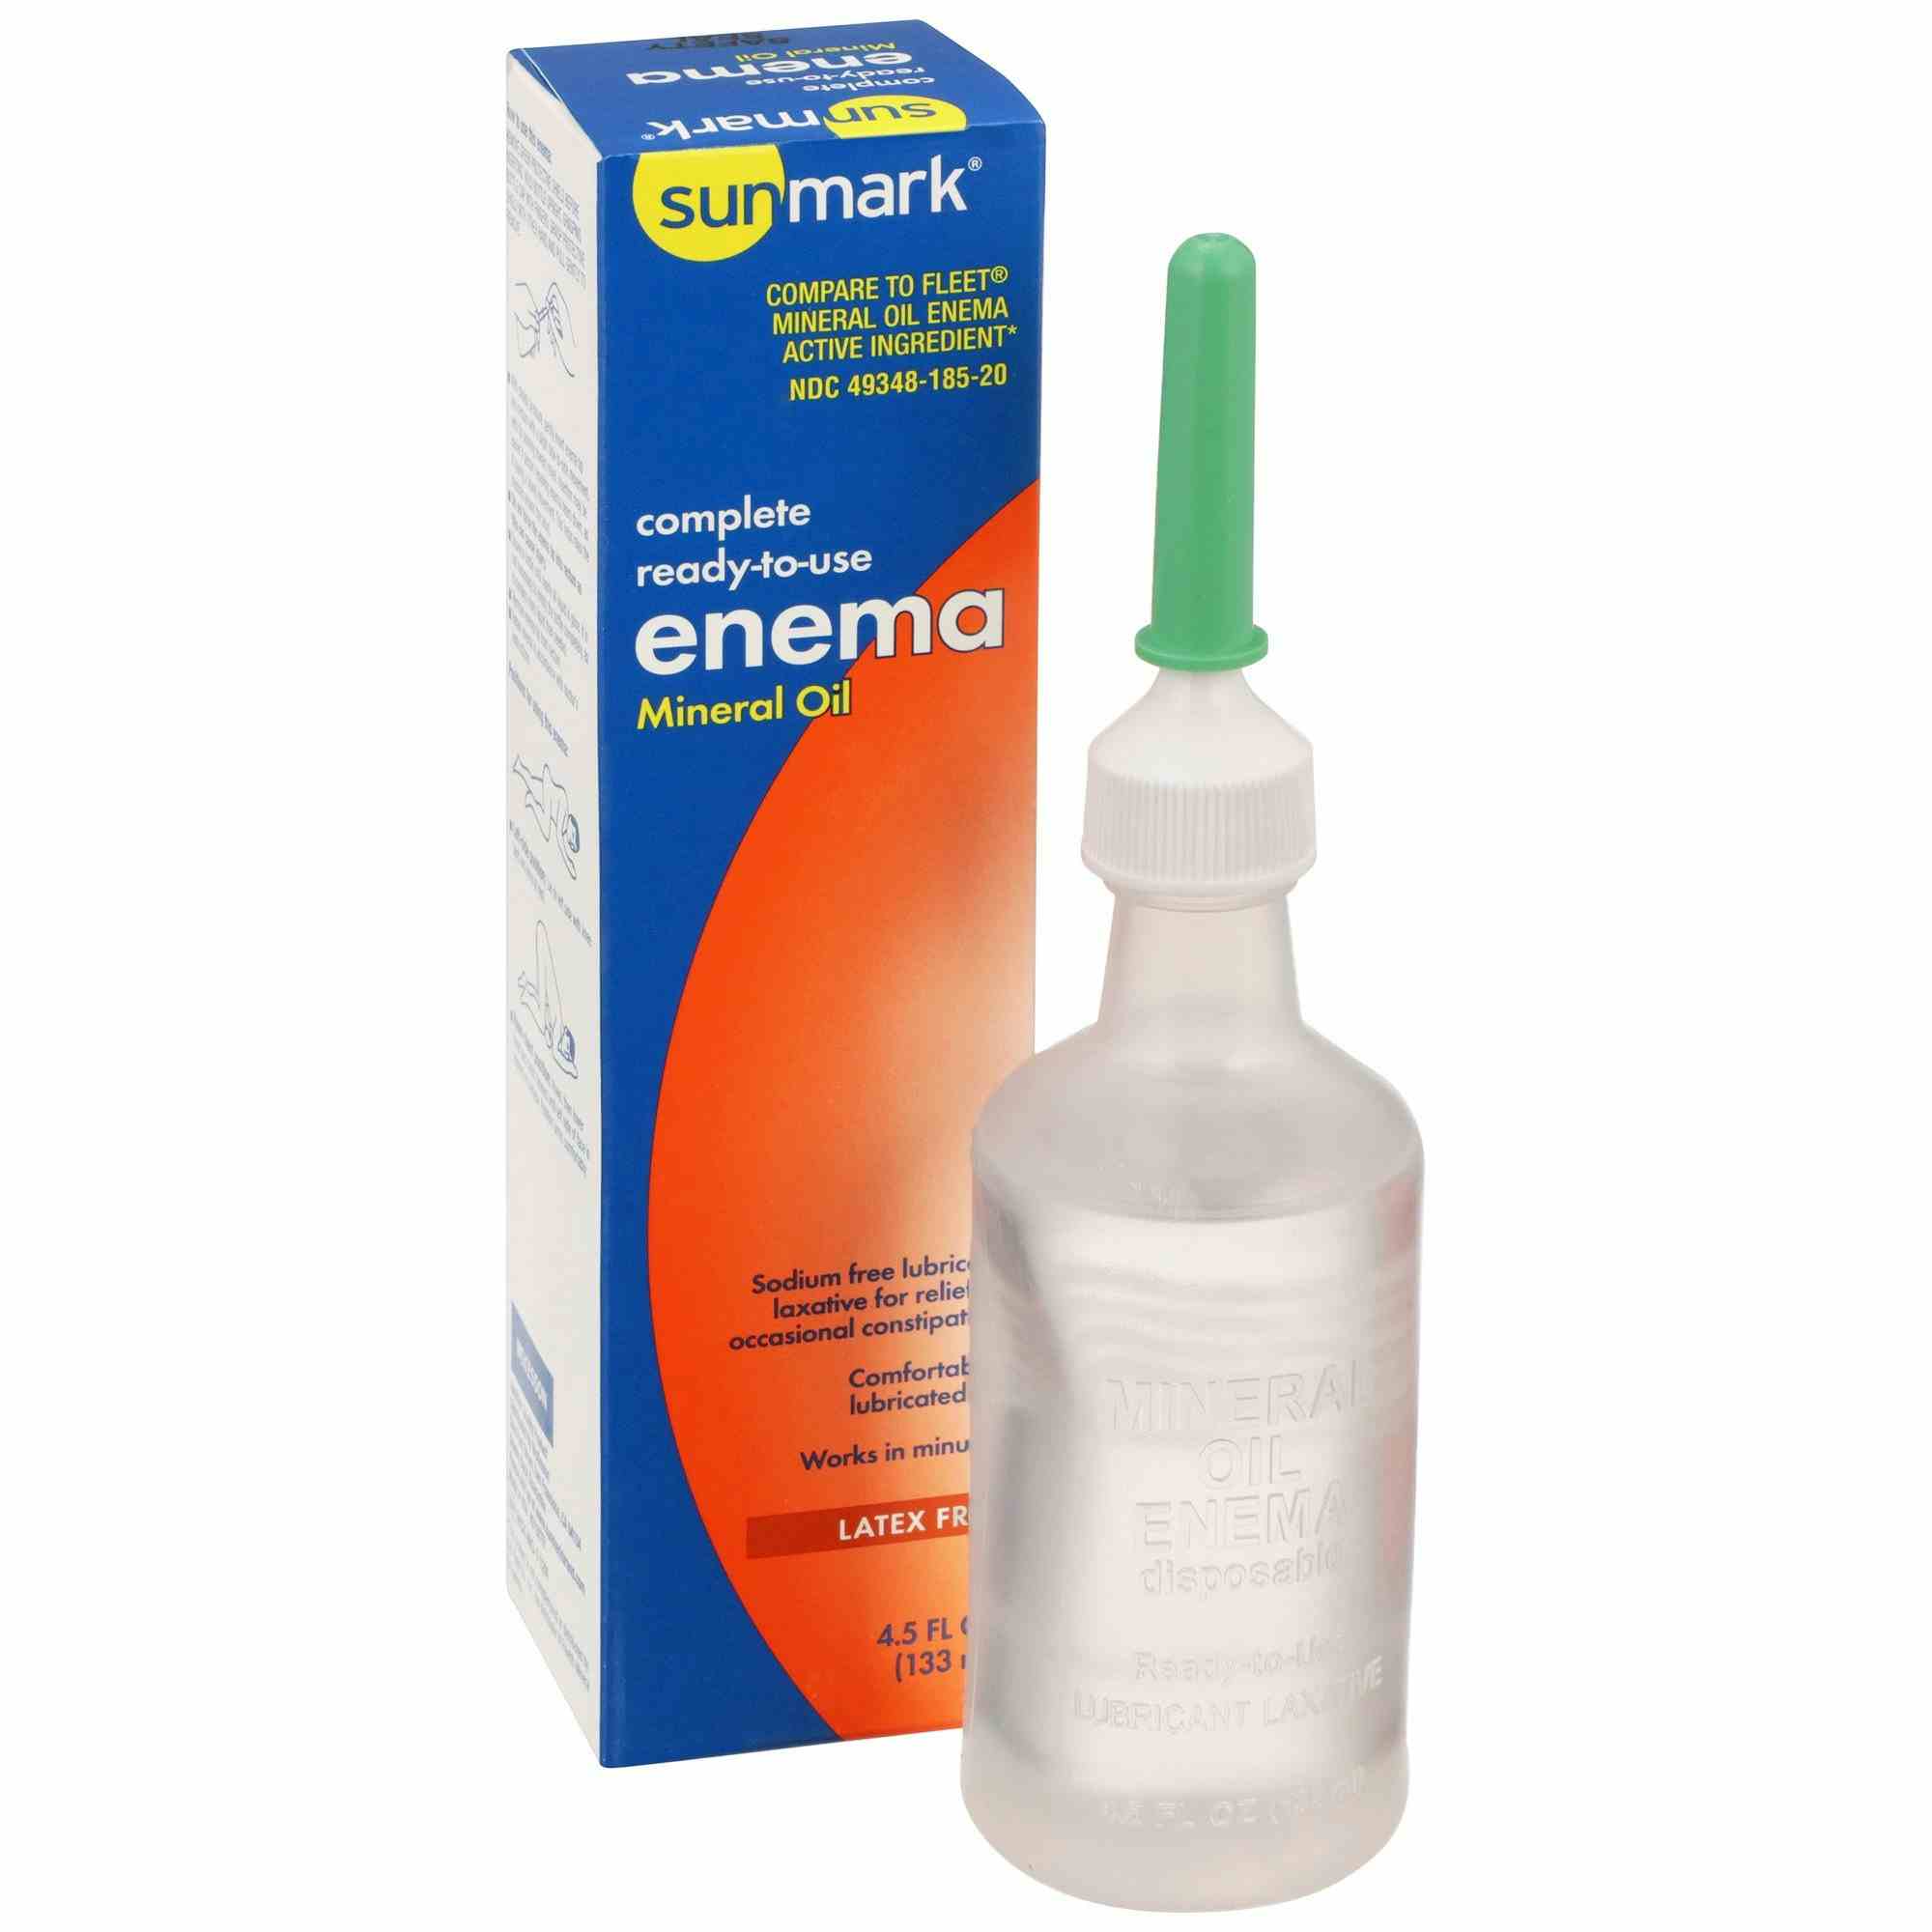 sunmark Complete Ready-To-Use Mineral Oil Enema, 49348018520, 1 Each